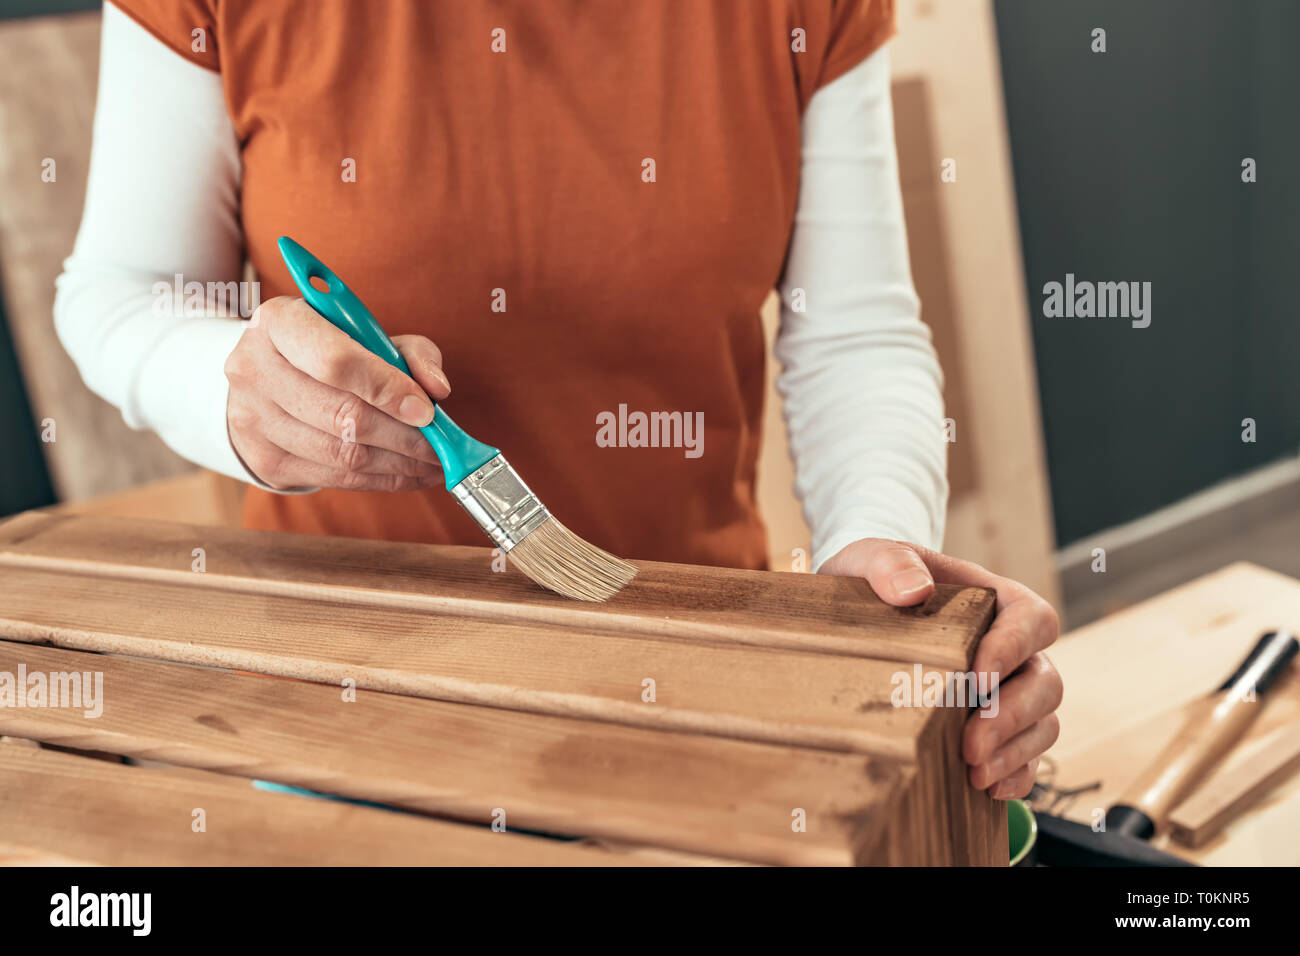 Female carpenter varnishing wooden crate with brush in her small business woodwork workshop Stock Photo